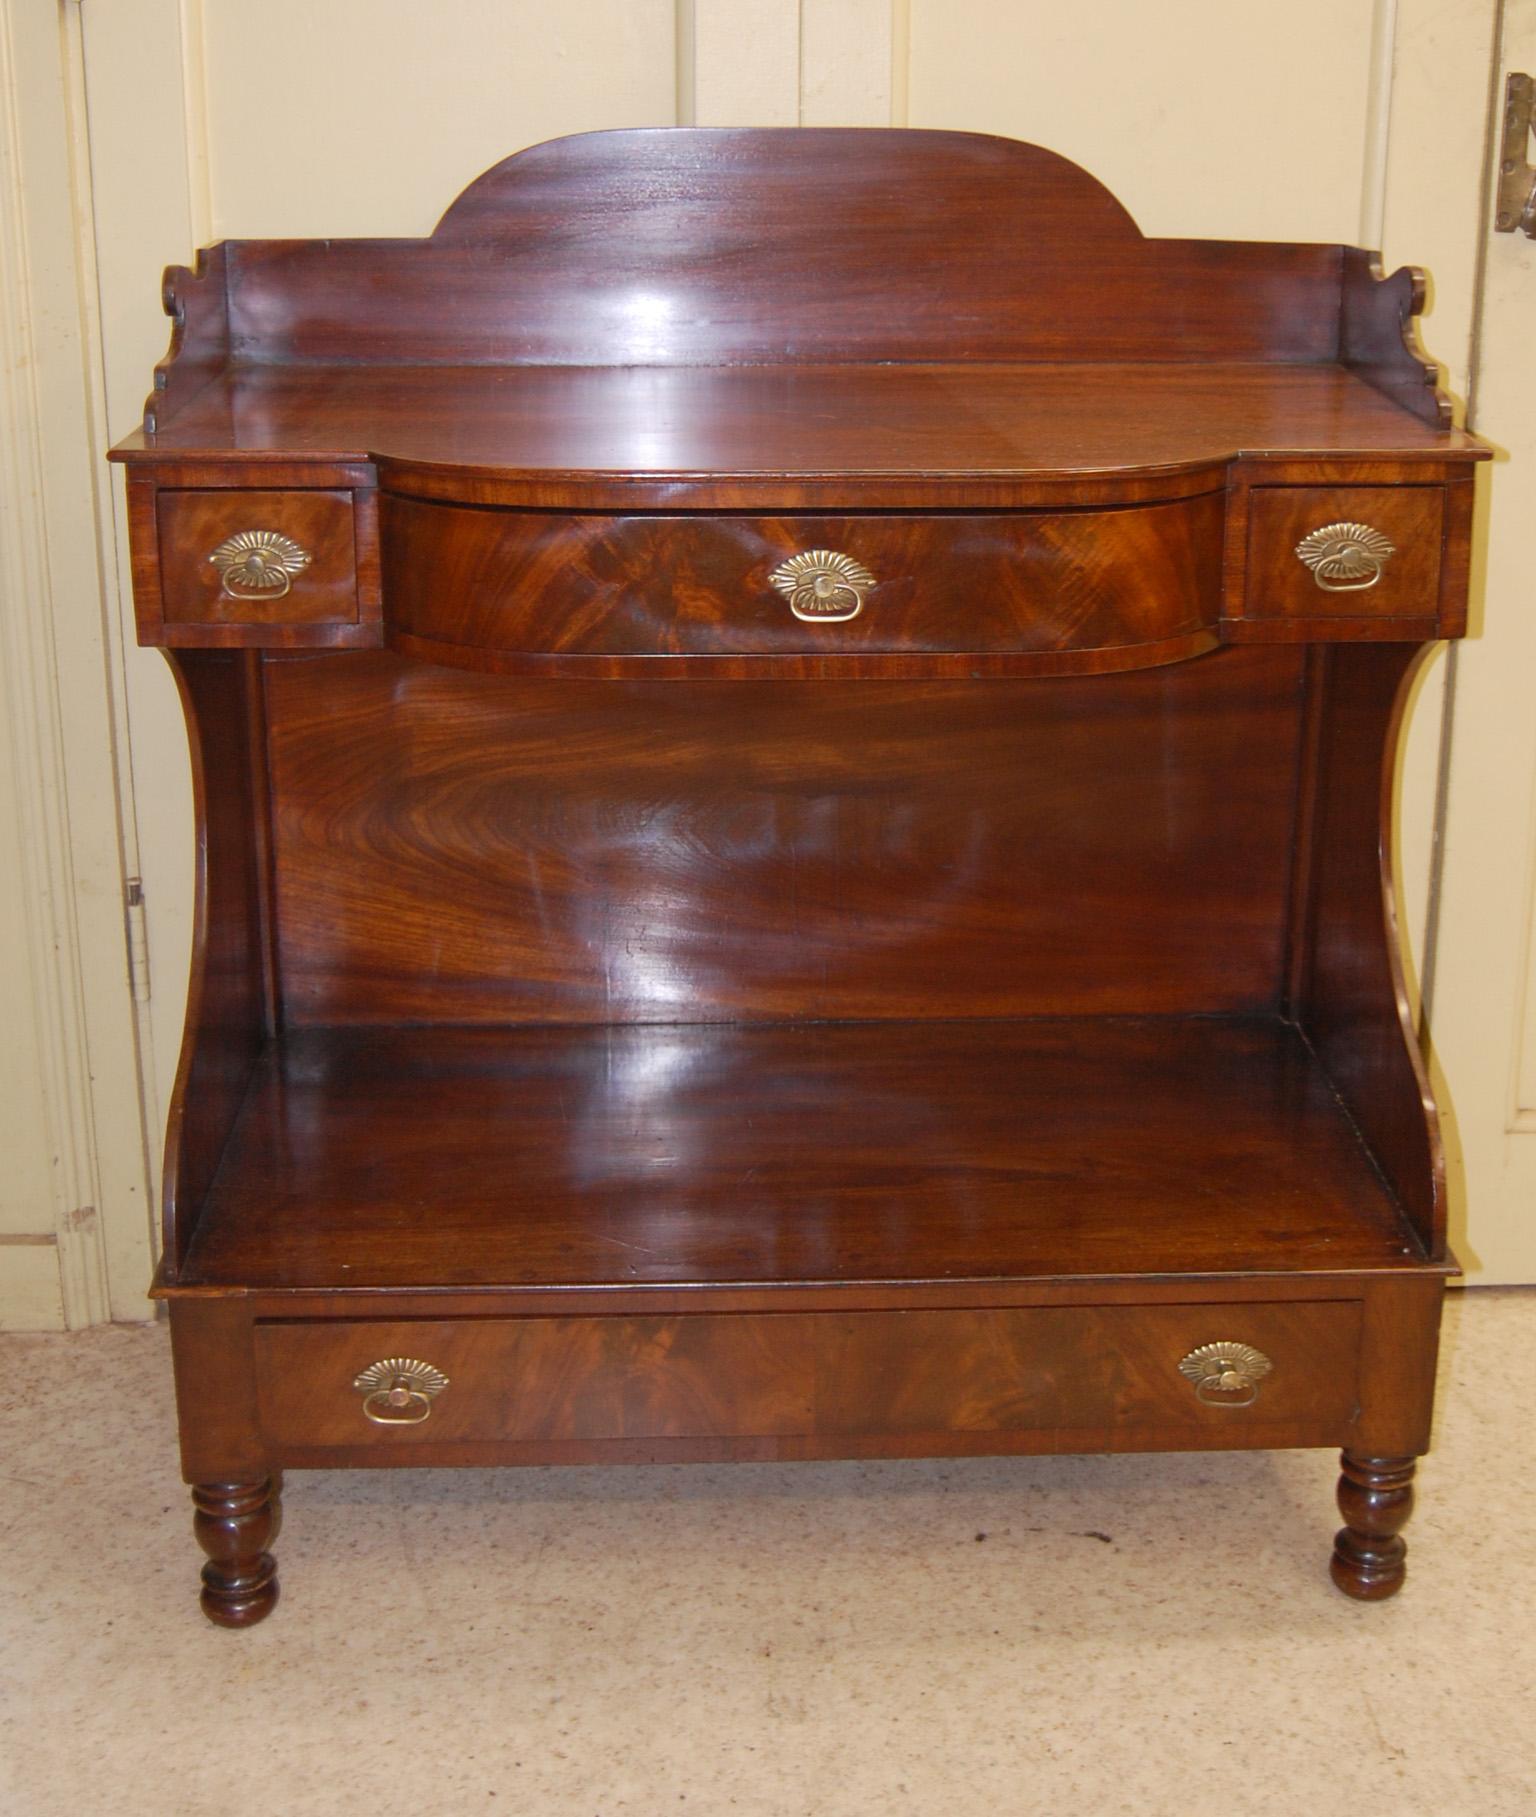  American Sheraton mahogany bowfront breakfront sidetable.  This unusual form has a galleried top, three drawers below the top surface and one long drawer below the lower surface, shaped sides, all standing on turned legs. The drawer fronts are